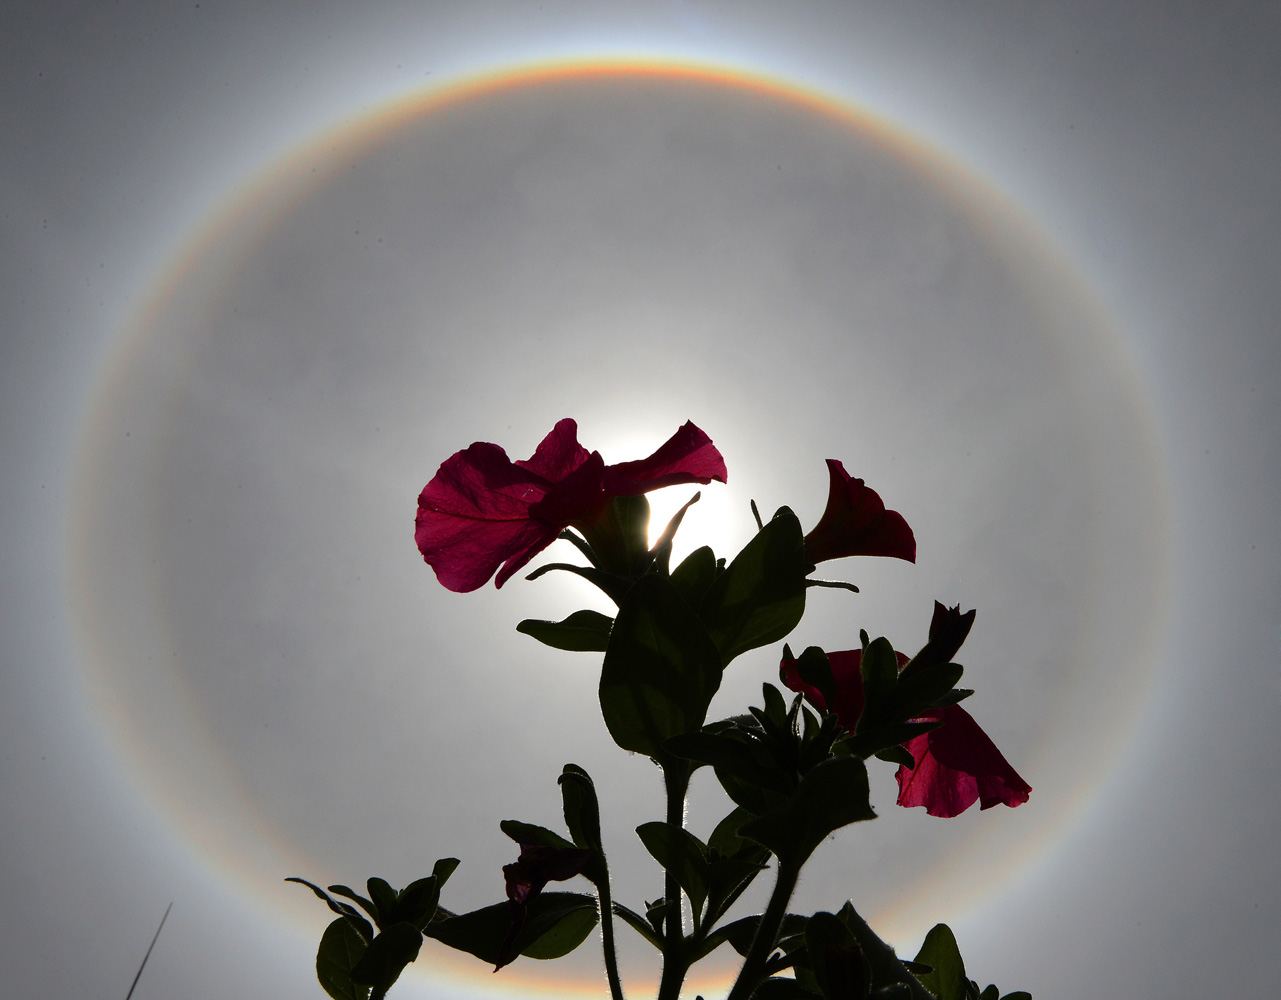 May 5, 2014. A solar halo appears in the sky over Lhasa, the capital of southwest China's Tibet Autonomous Region.